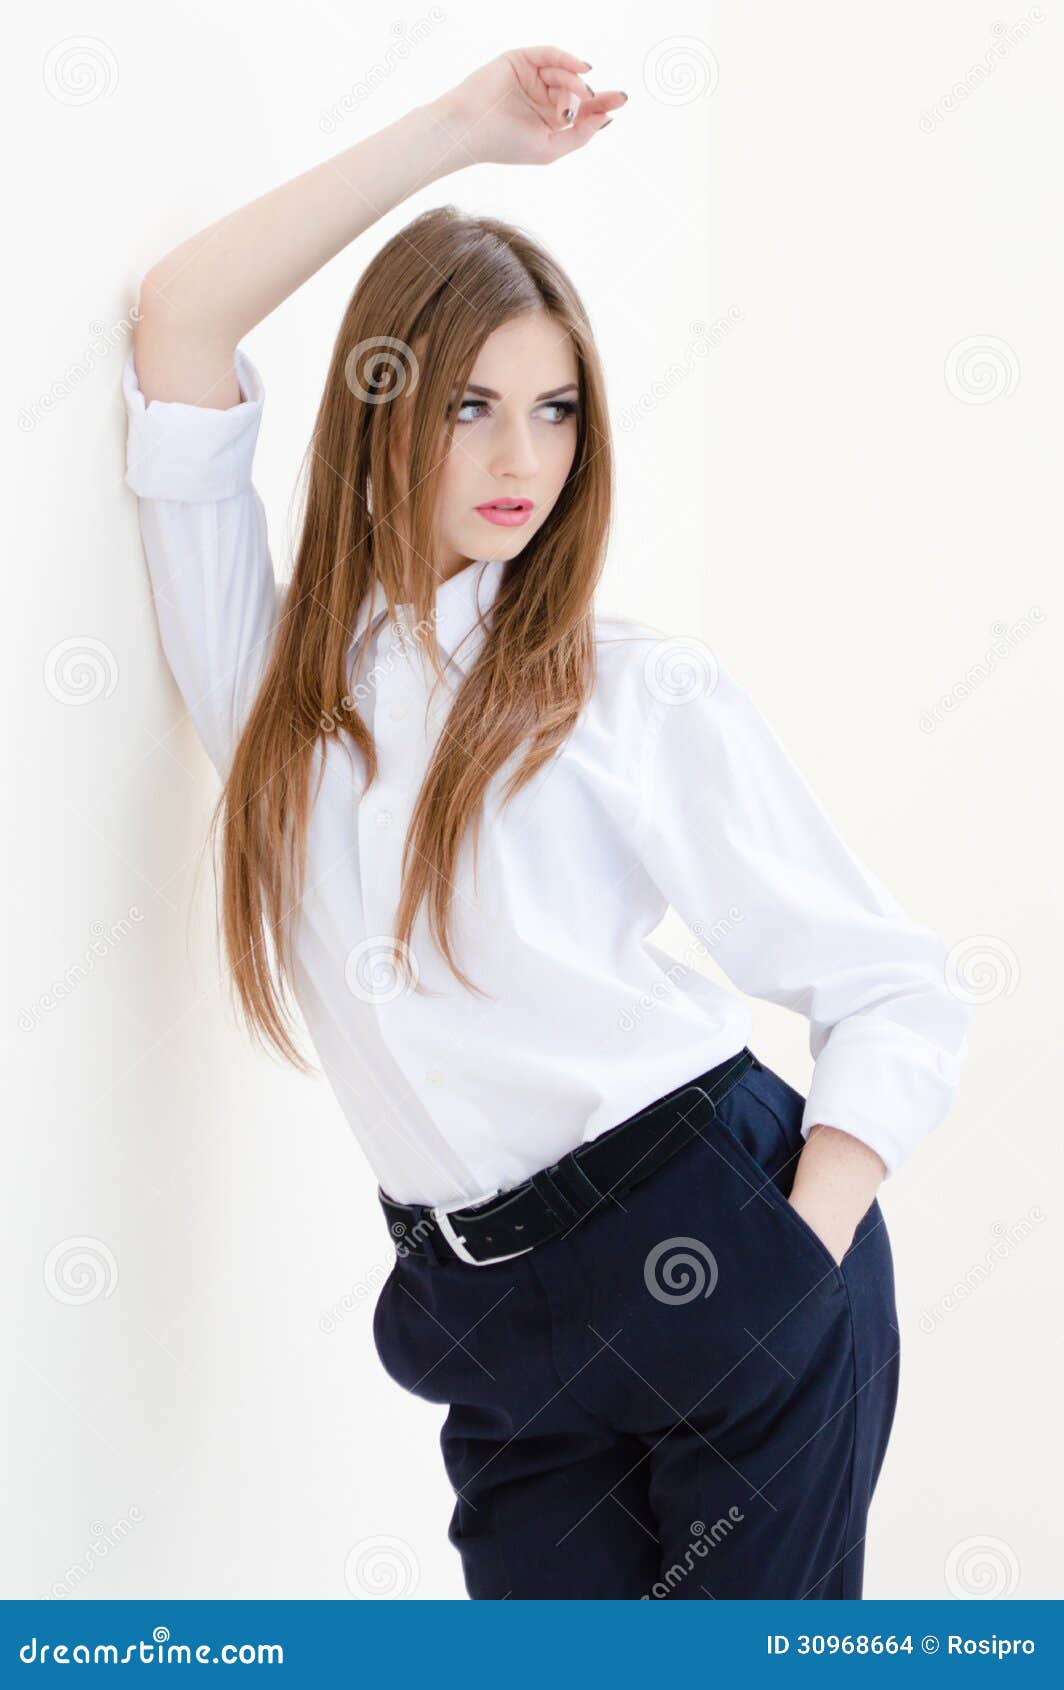 Woman In A White Mans Shirt Stock Image - Image of sensual 